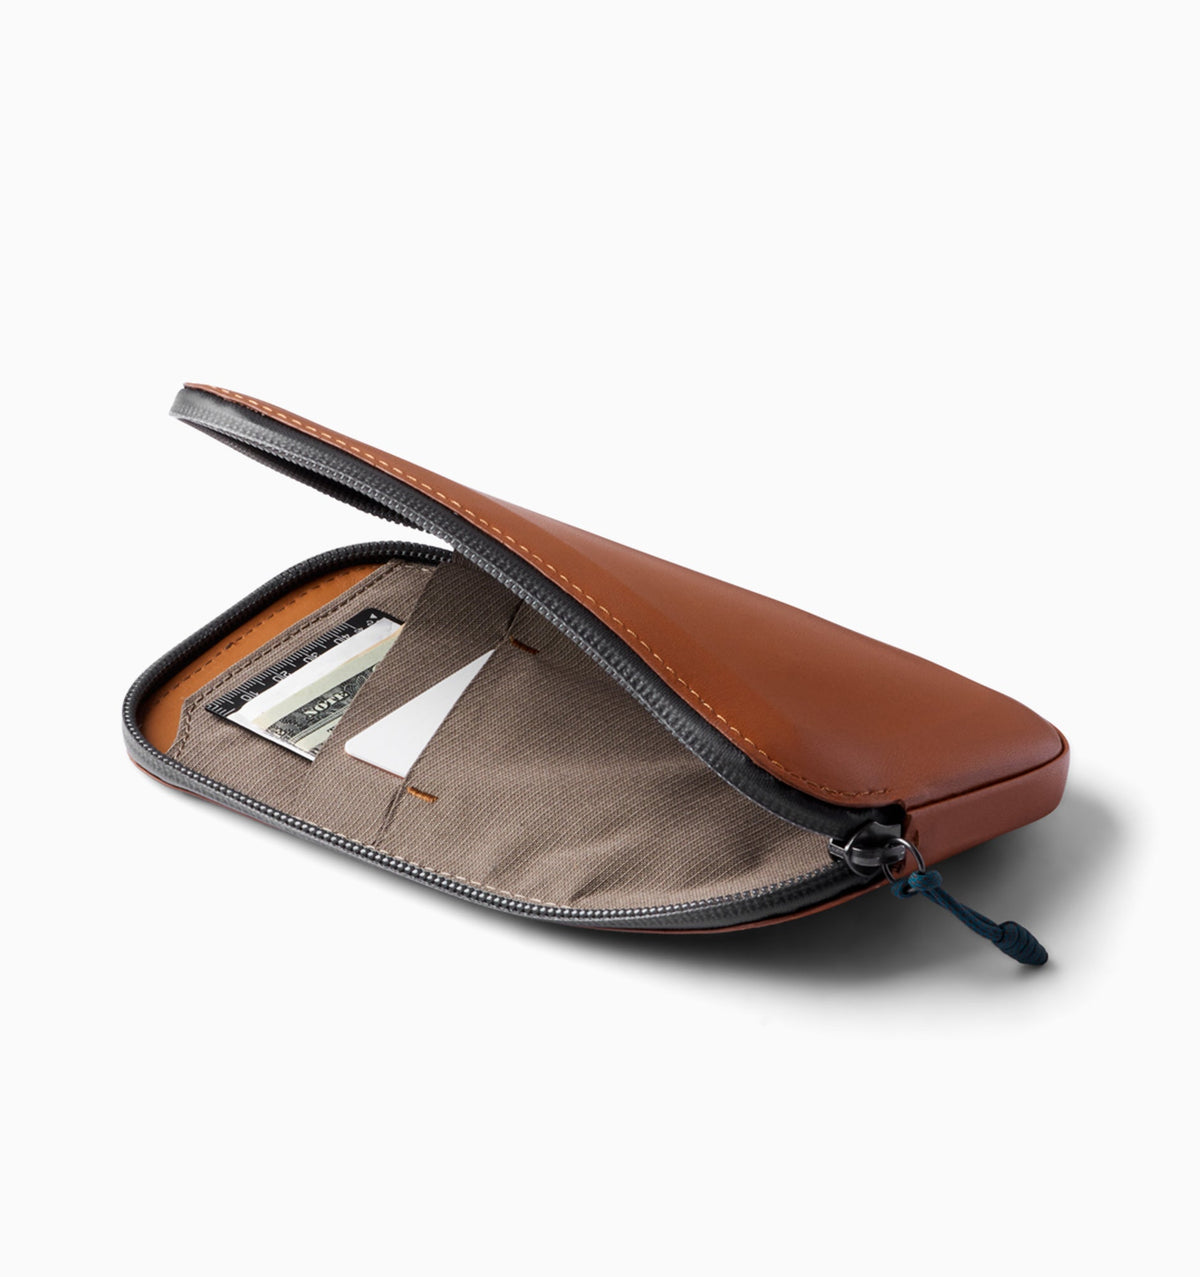 Bellroy All Conditions Phone Pocket Plus - Bronze